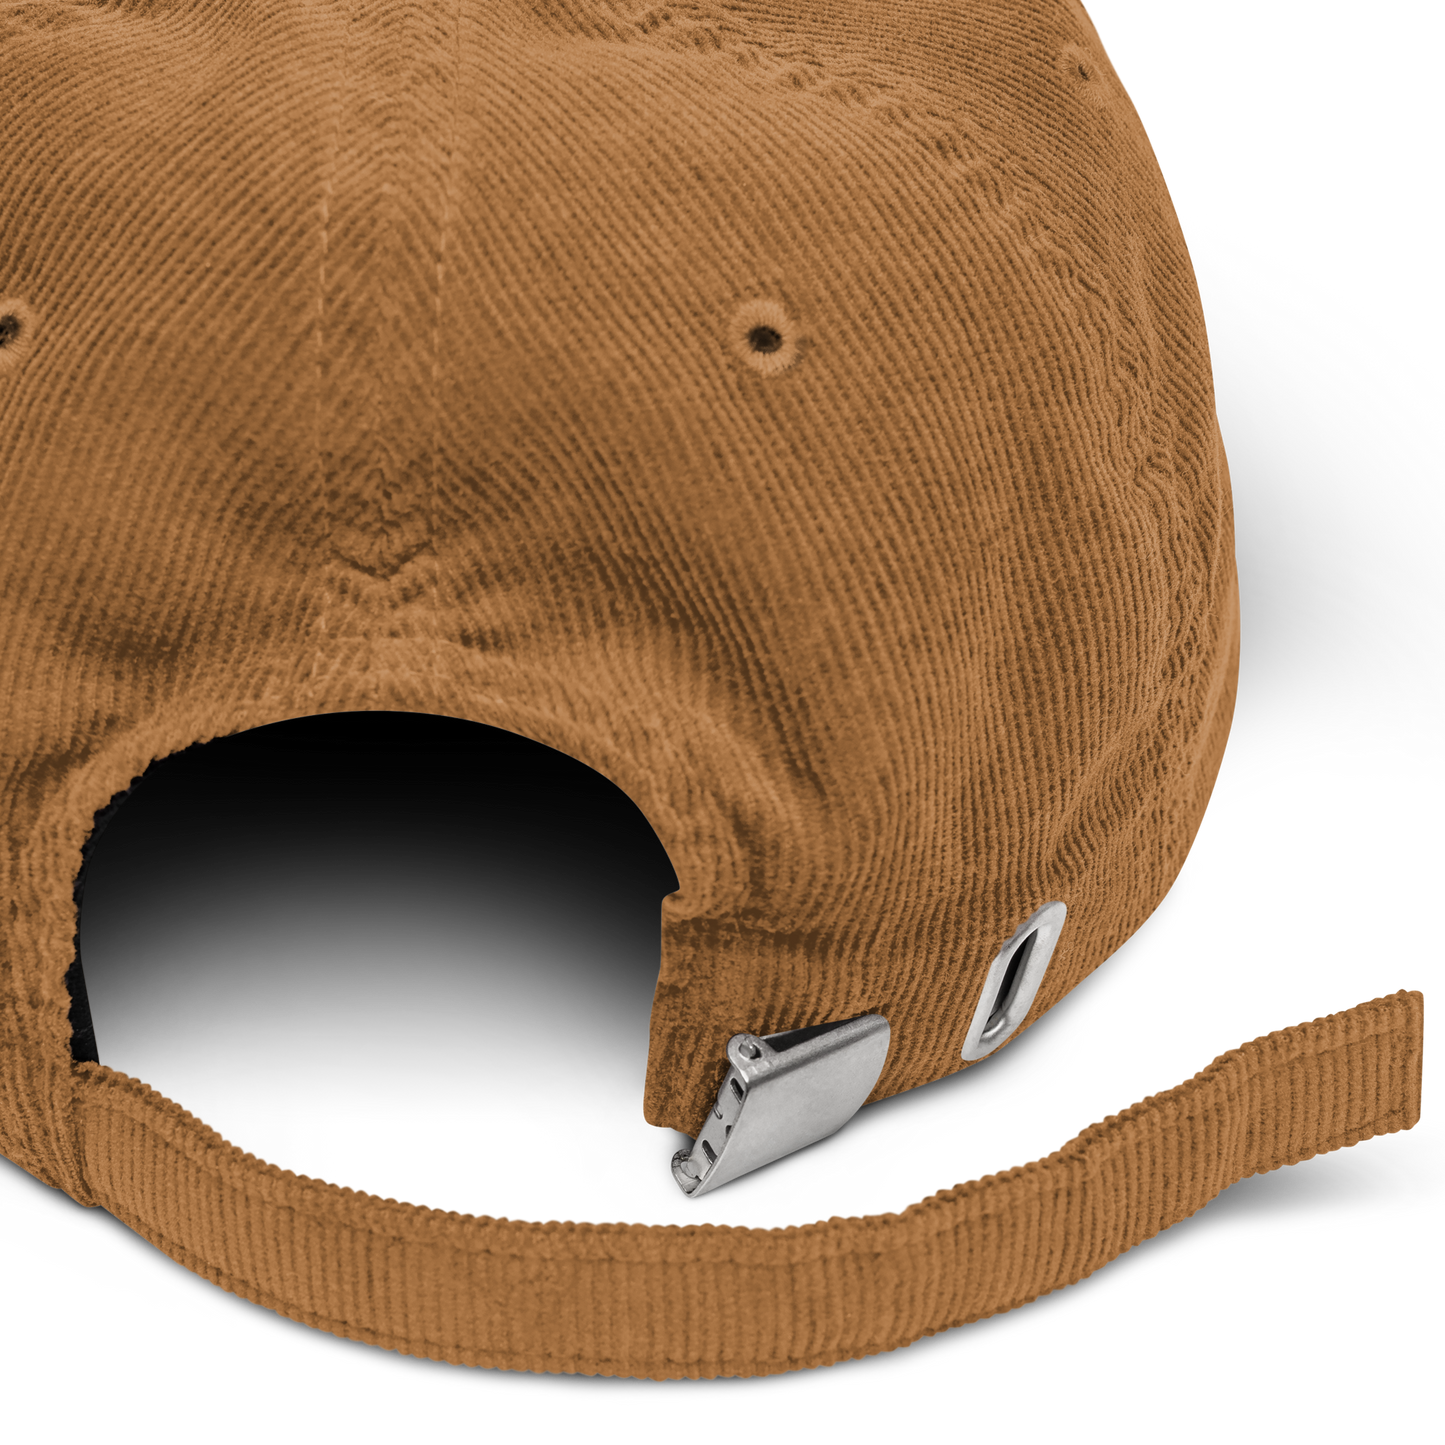 Y - The letter collection - Corduroy hat